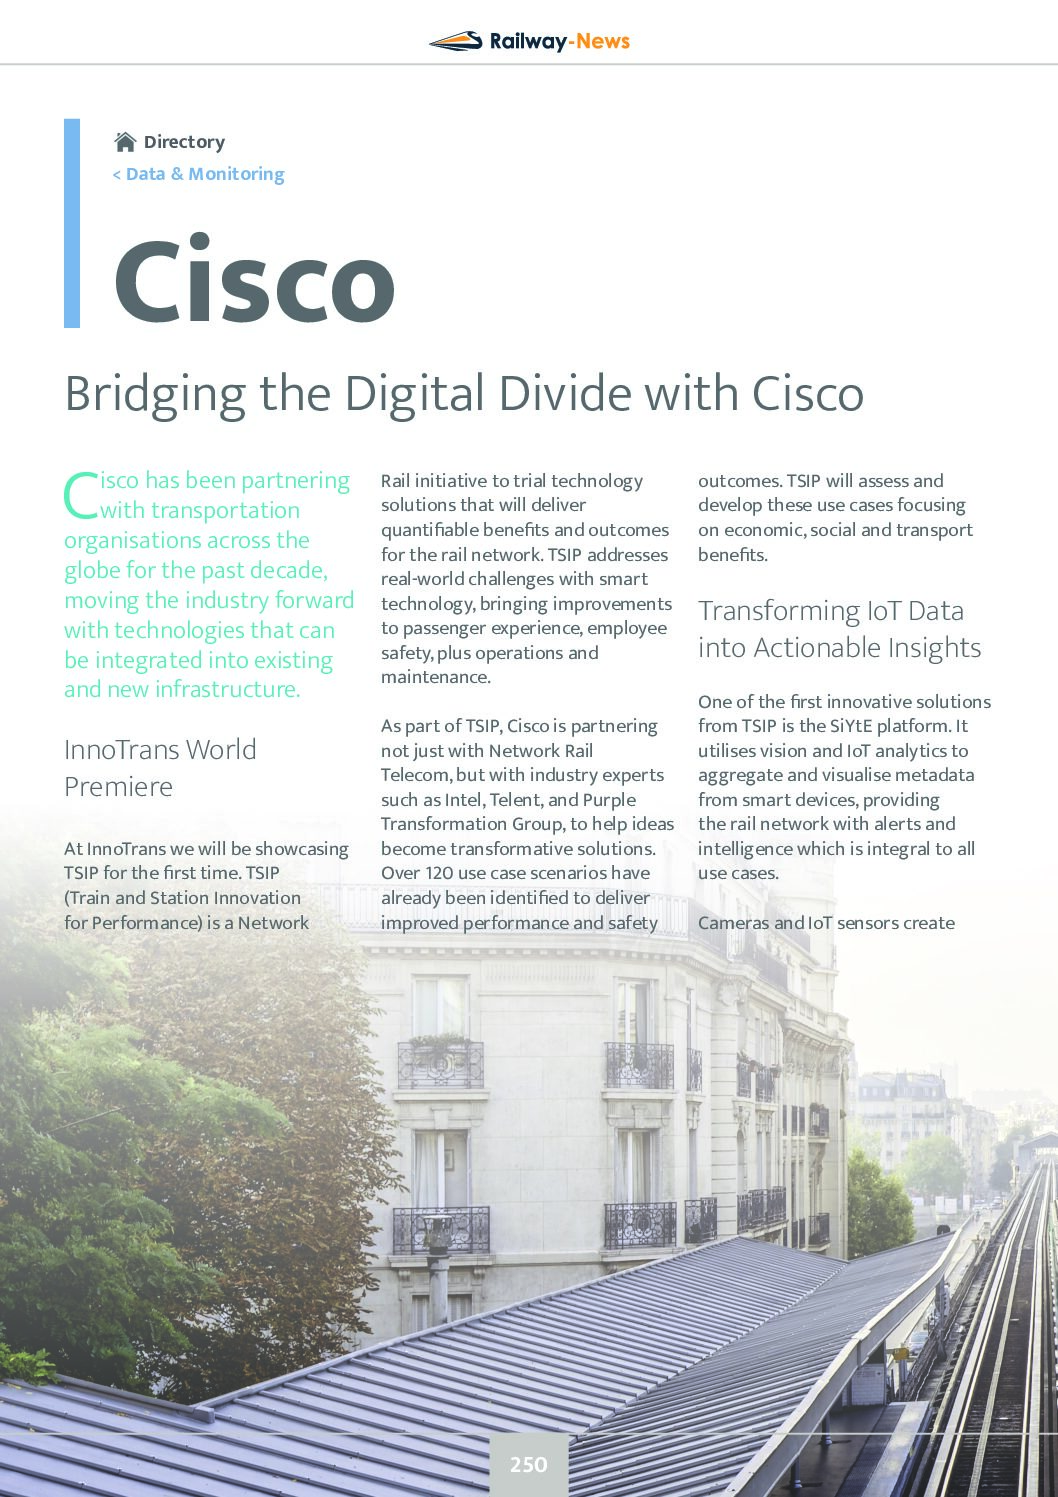 Bridging the Digital Divide with Cisco